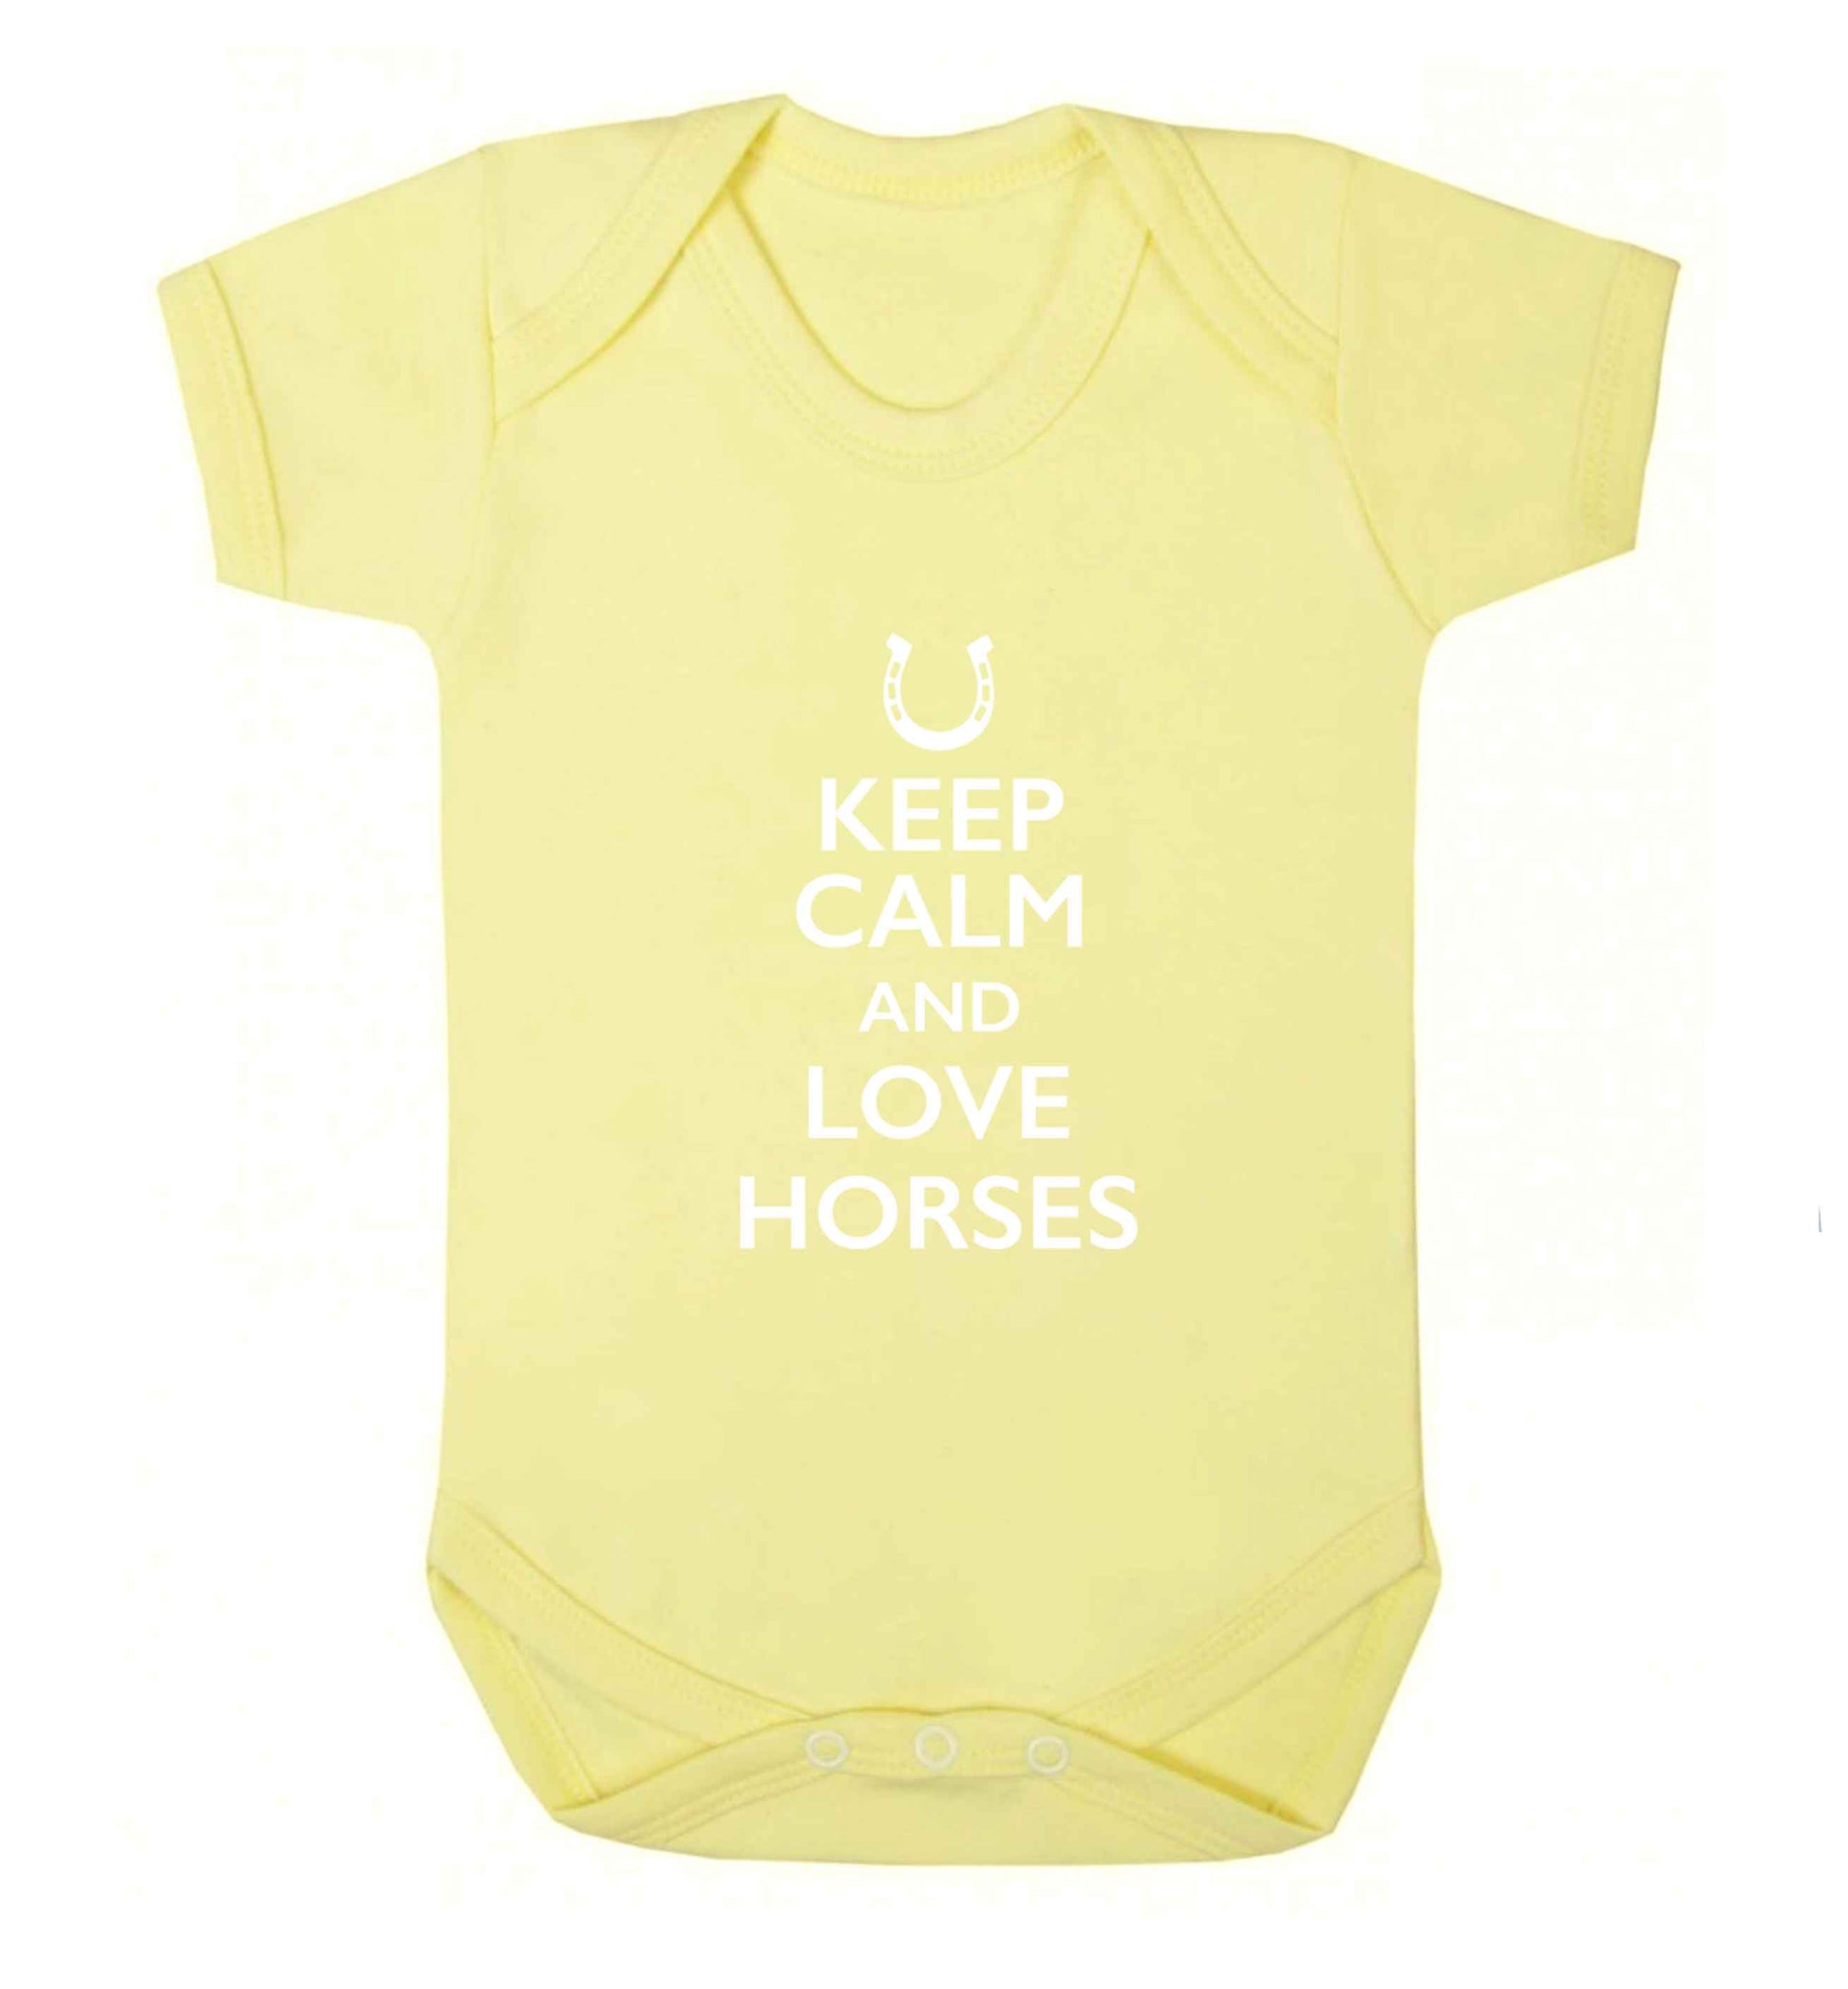 Keep calm and love horses baby vest pale yellow 18-24 months